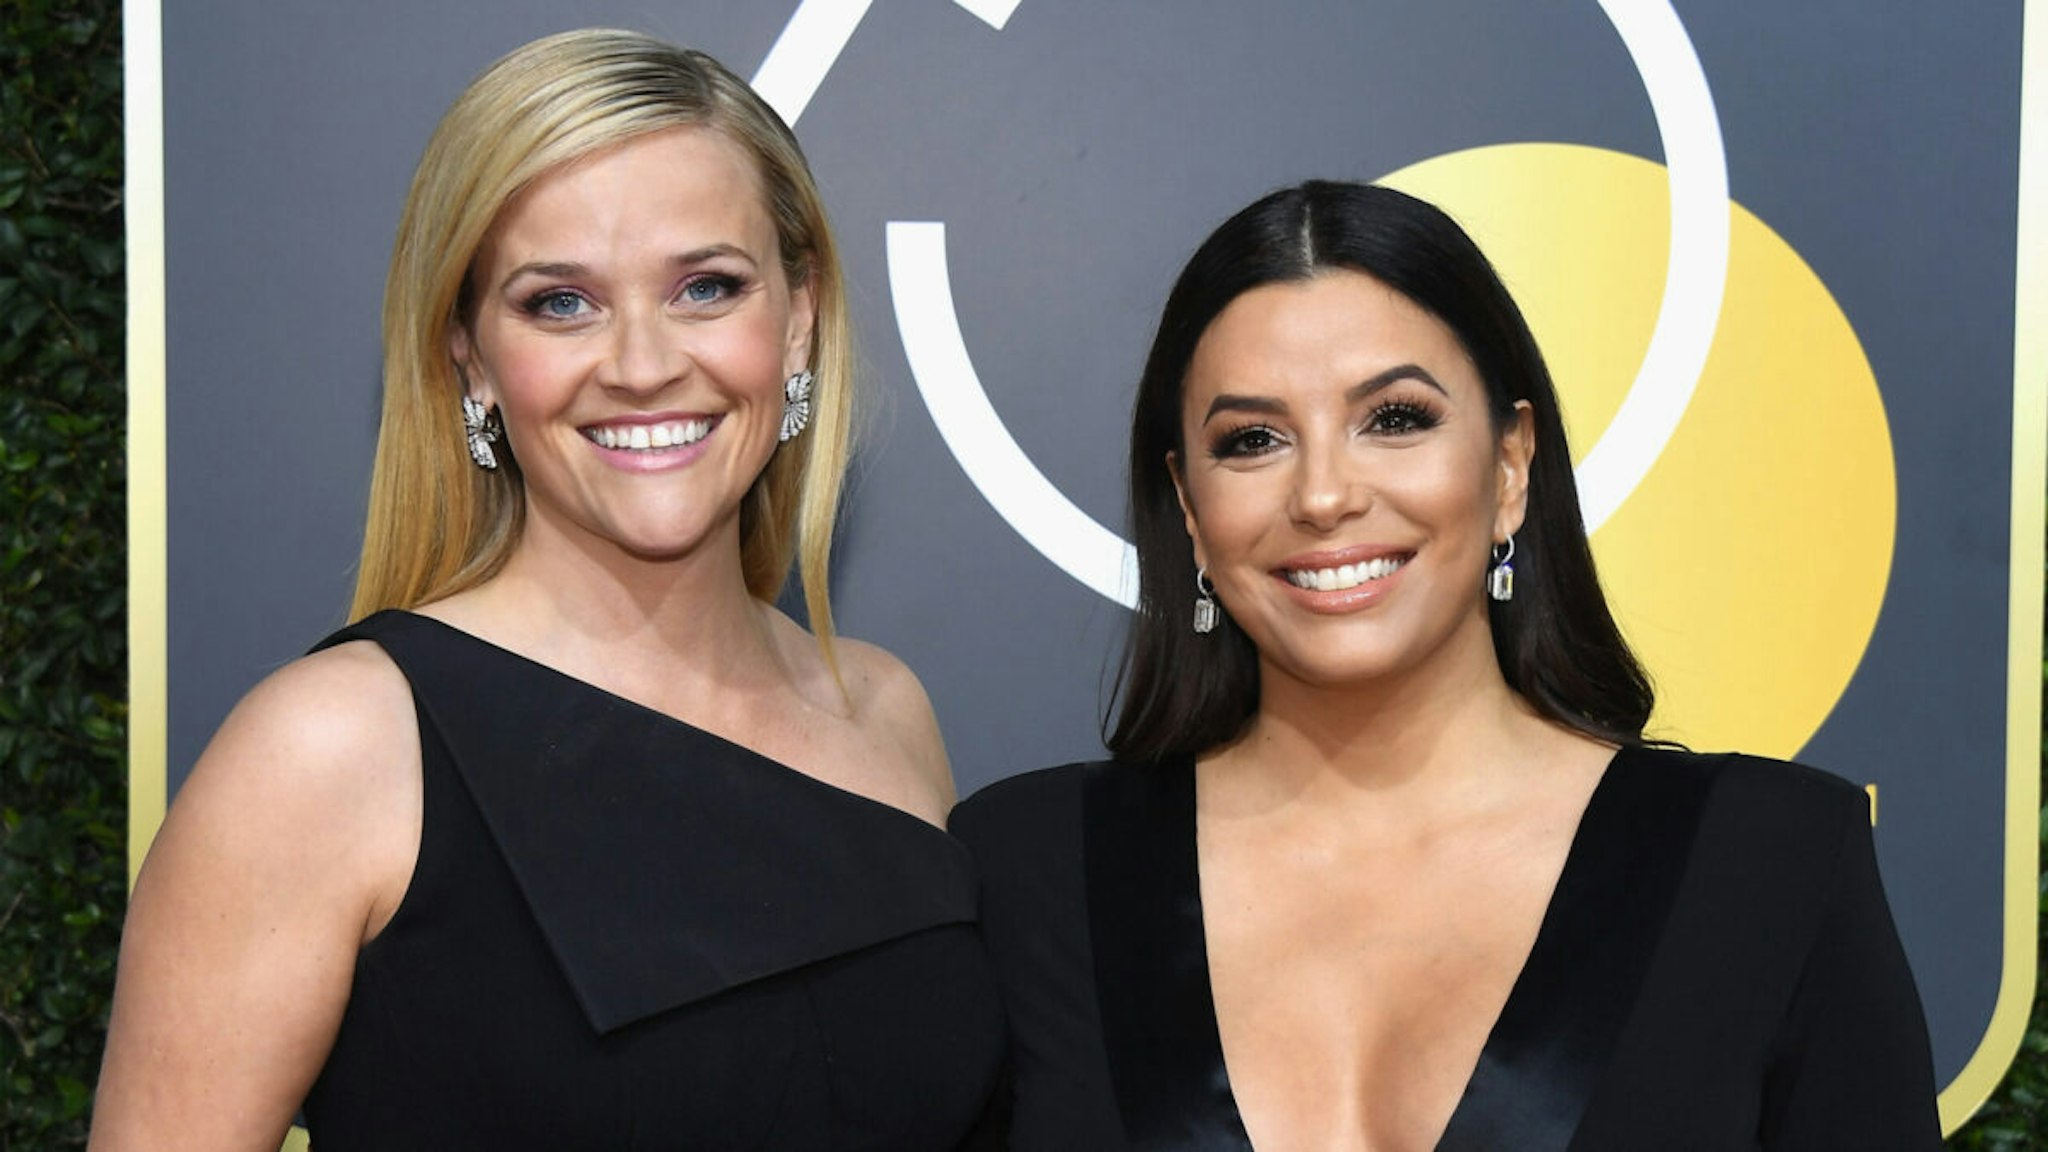 Actors Reese Witherspoon (L) and Eva Longoria arrive to the 75th Annual Golden Globe Awards held at the Beverly Hilton Hotel on January 7, 2018.